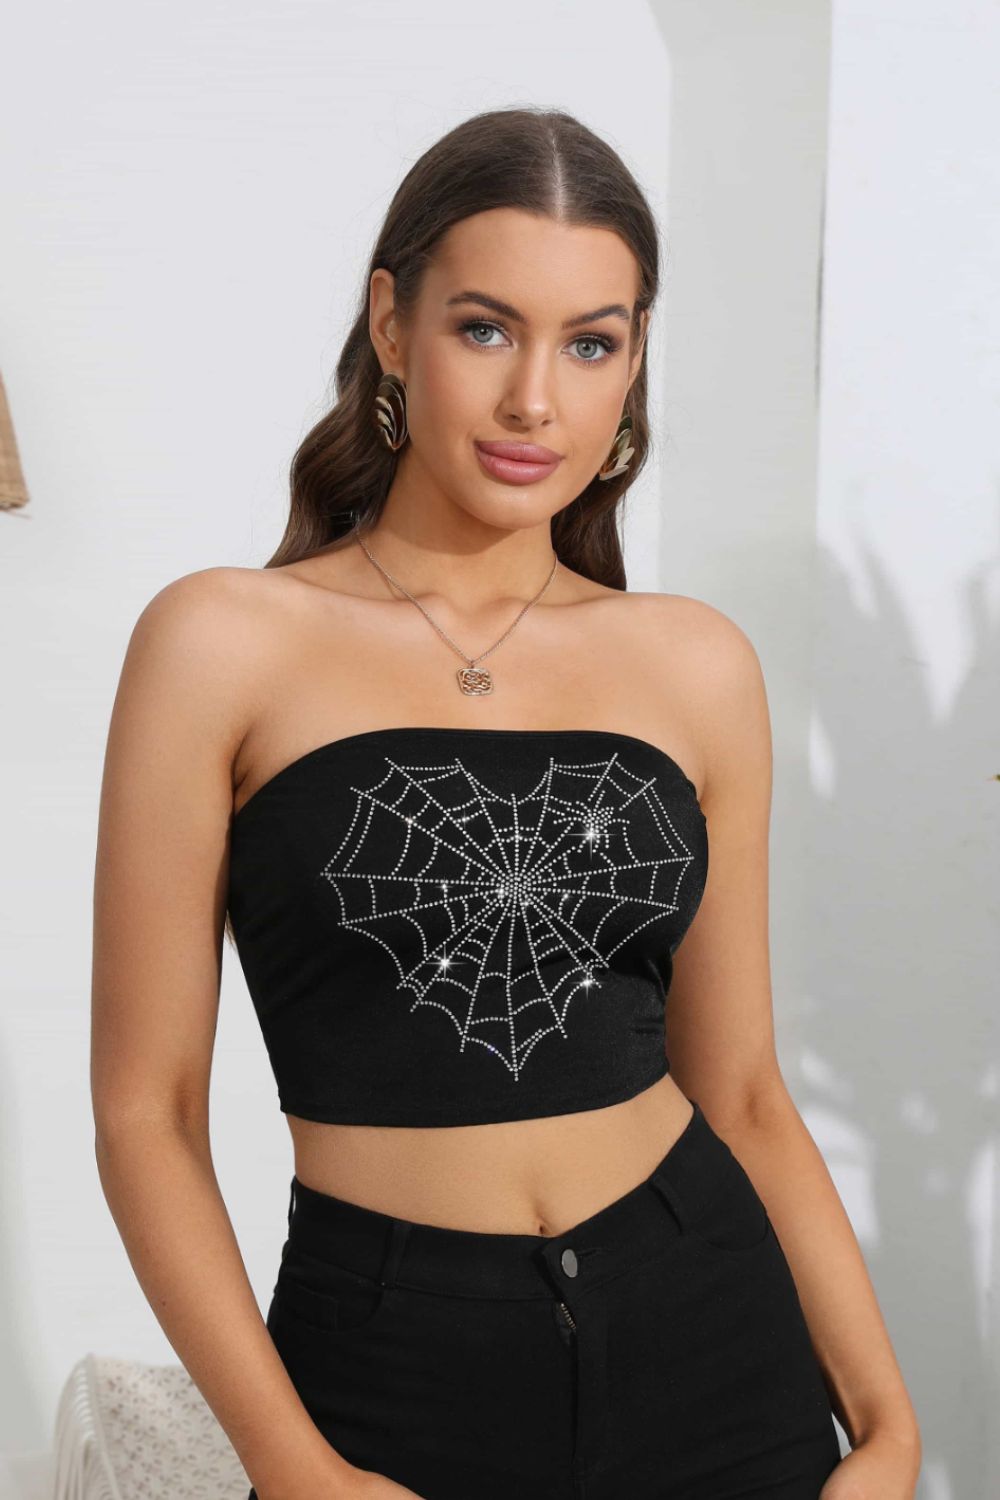 Heart Spider Web Graphic Tube Top with Rhinestones in Black